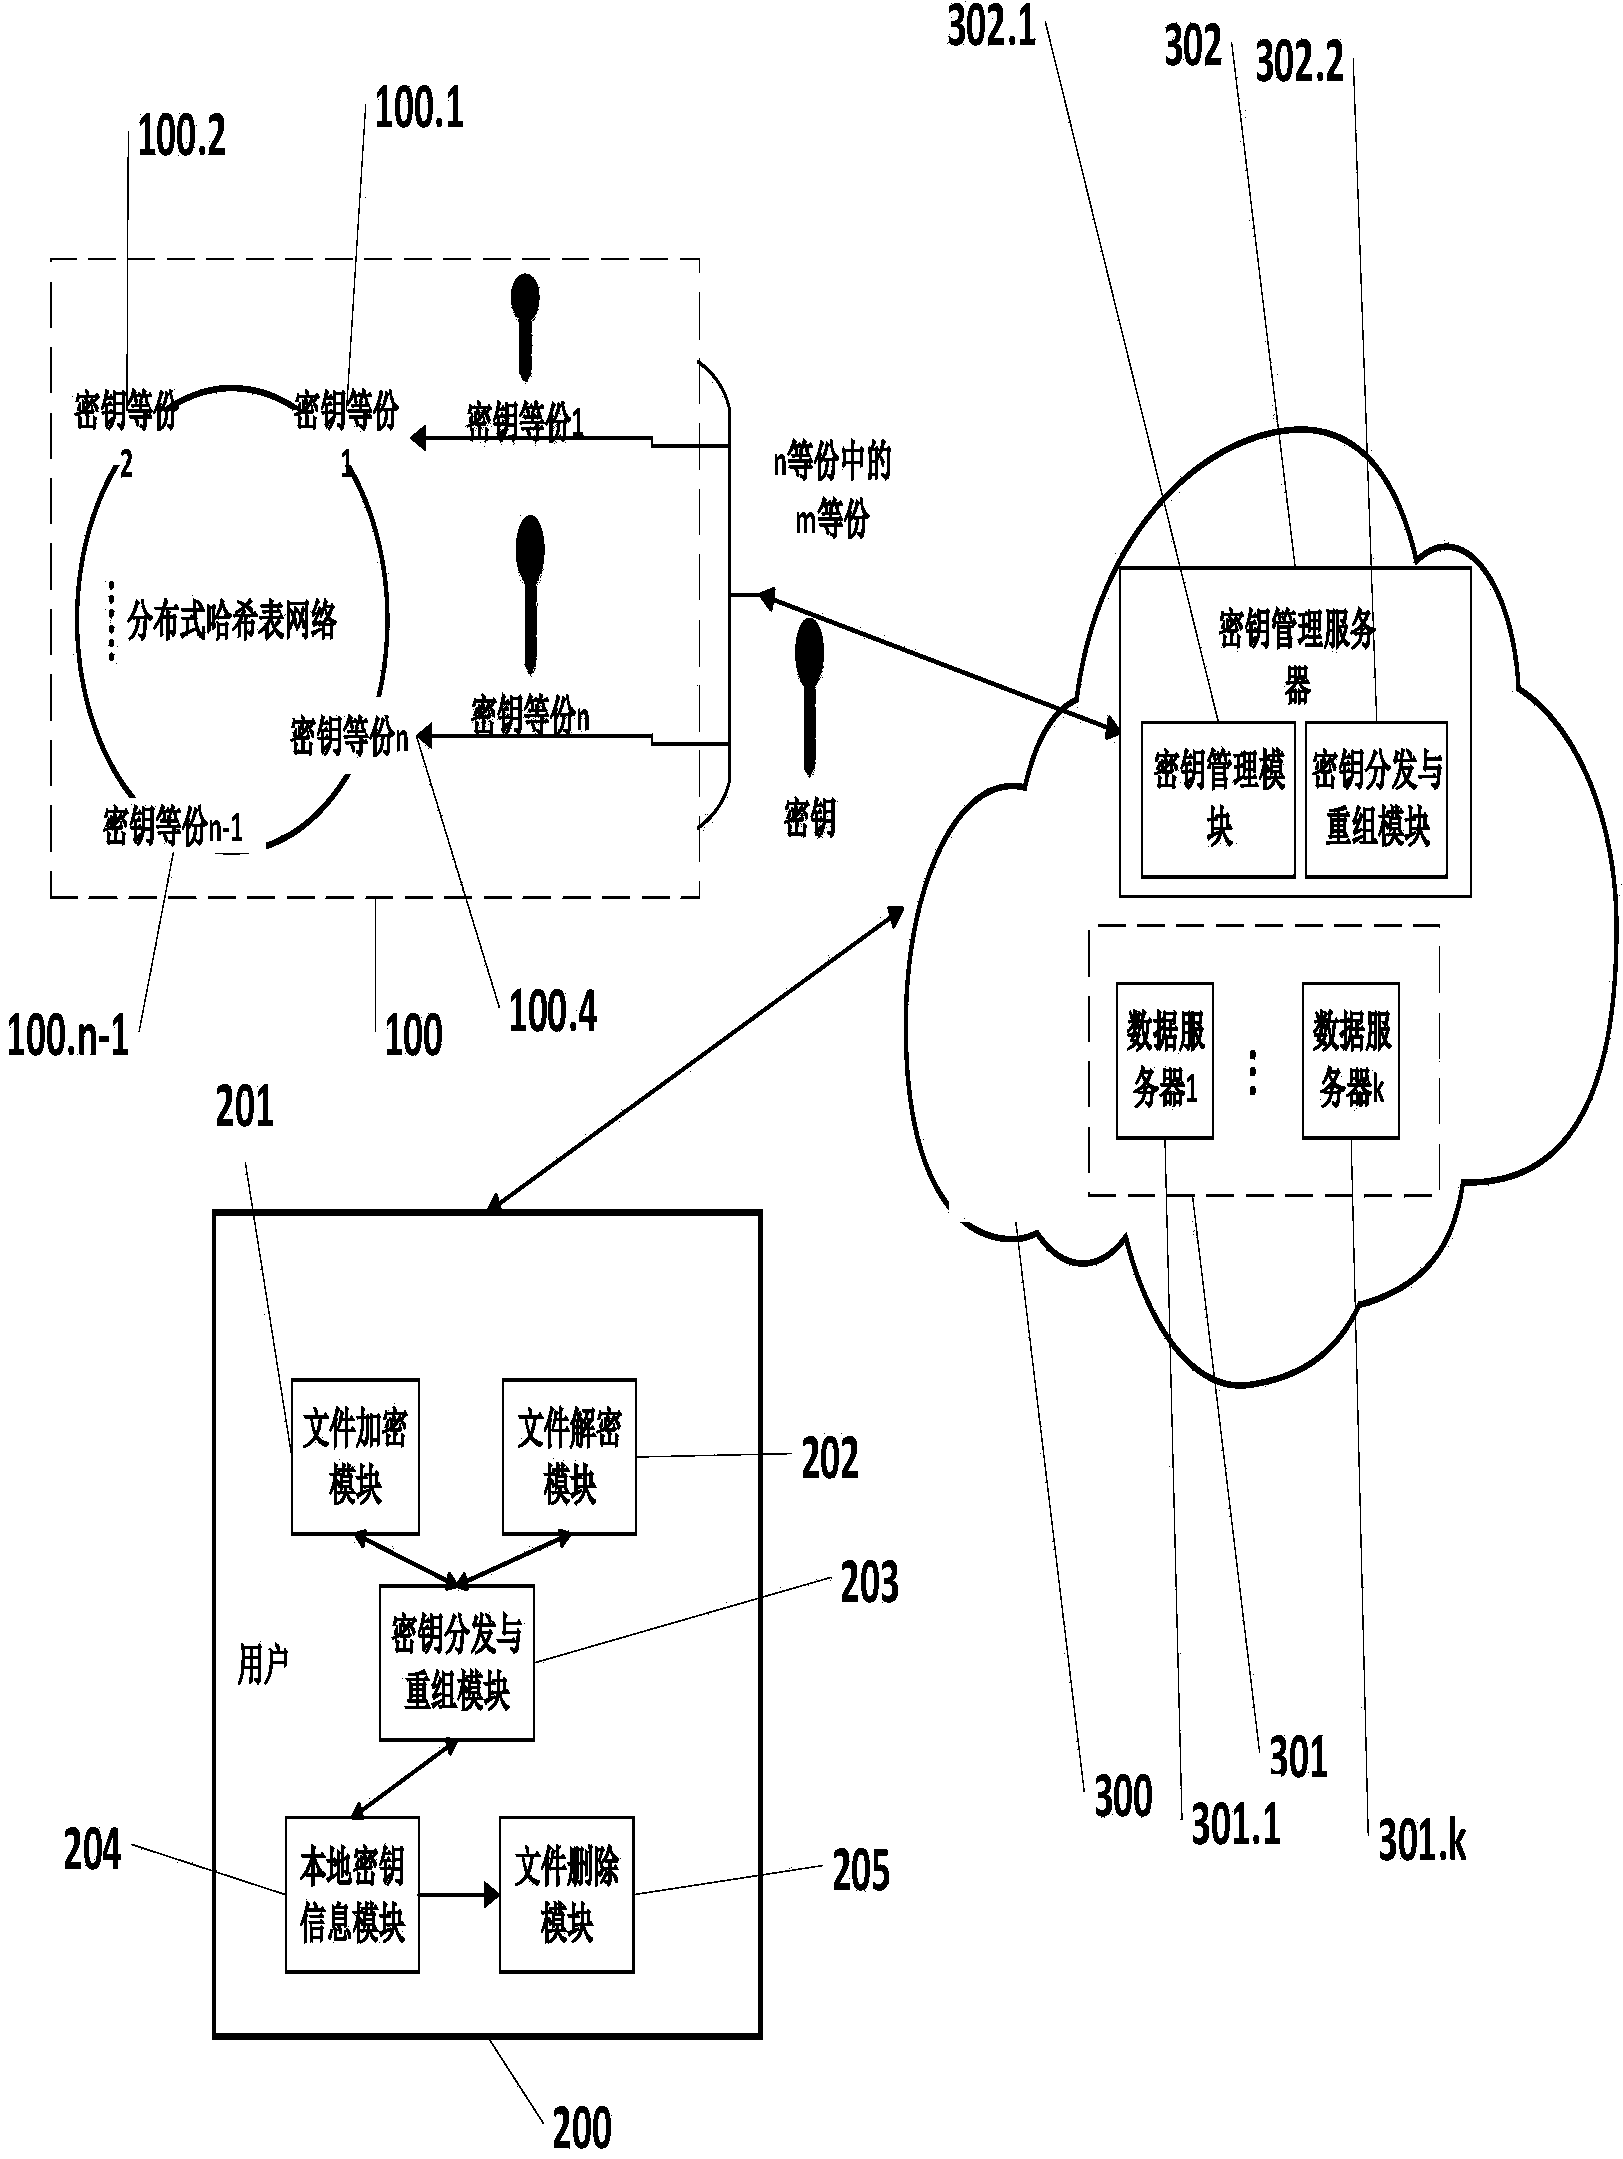 Cloud data safe deleting system and method without support of trusted third party